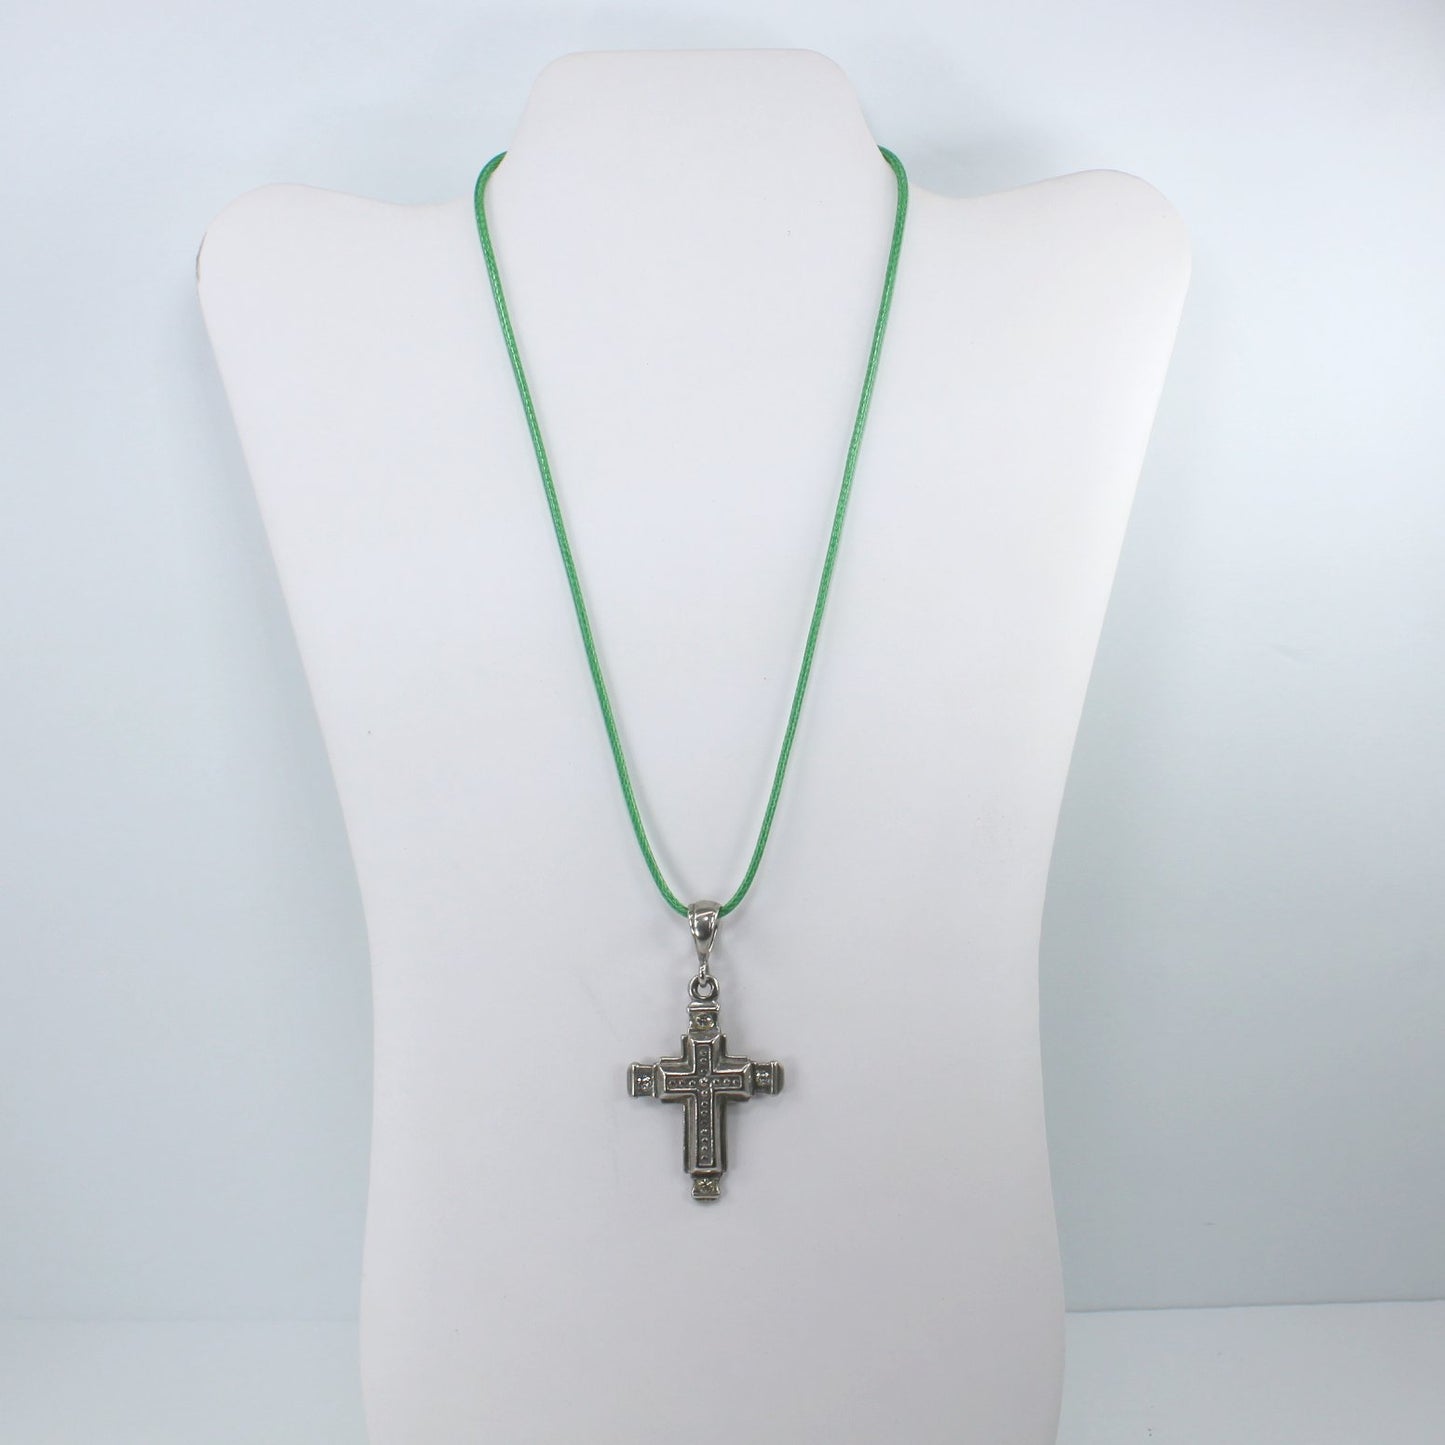 Large Silver Metal Cross Dimensional Cross on Cross Rhinestone Decorated full view as on neck